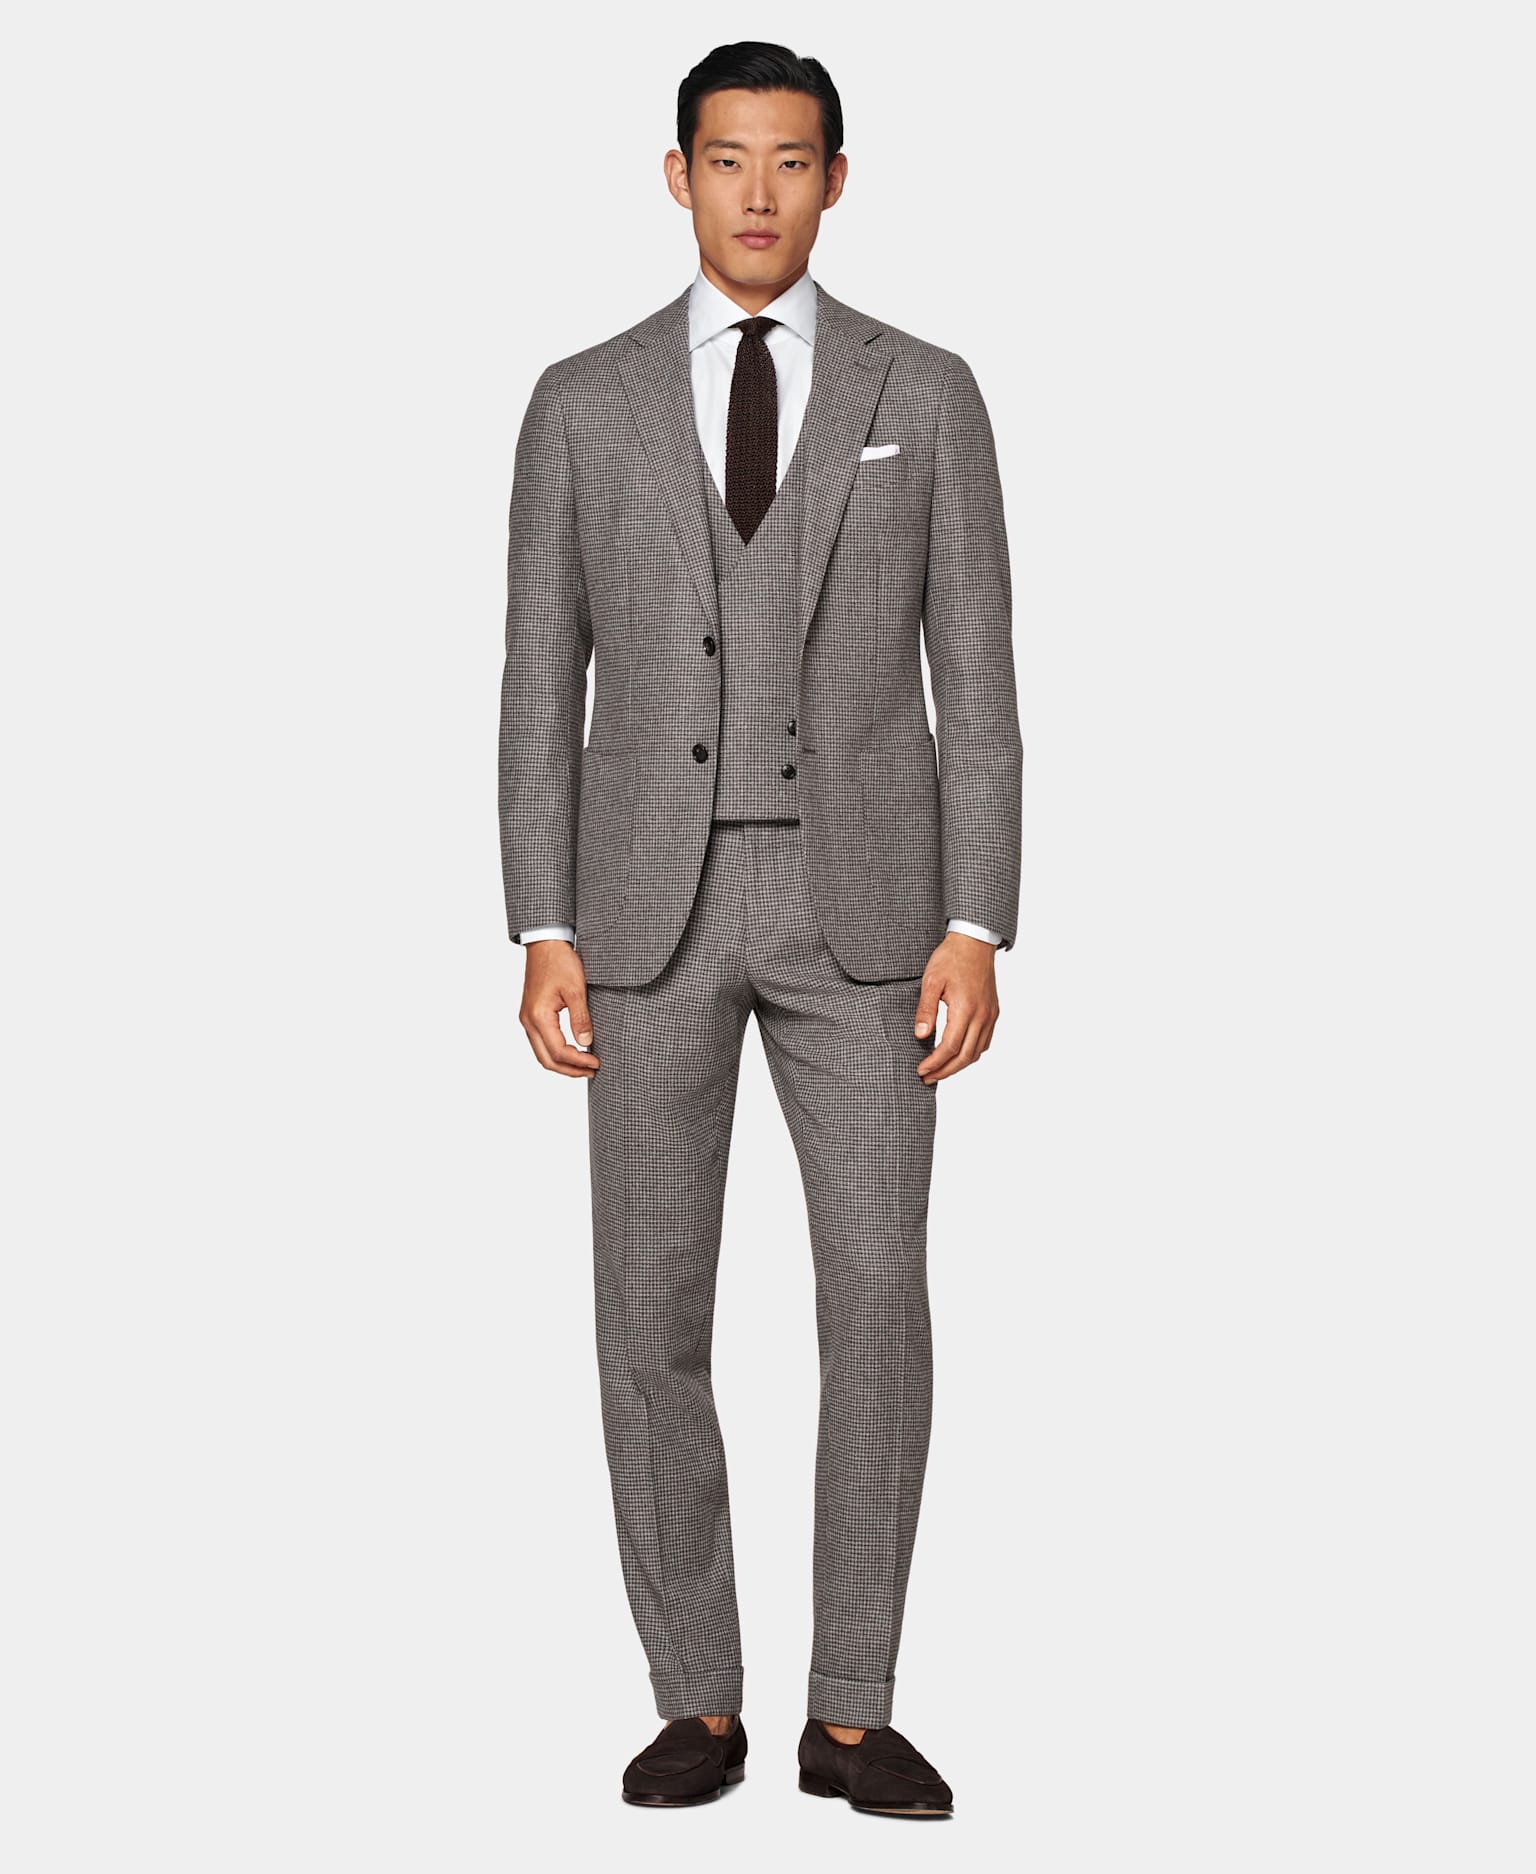 Men’s Wedding Attire by Season | What To Wear | SUITSUPPLY US